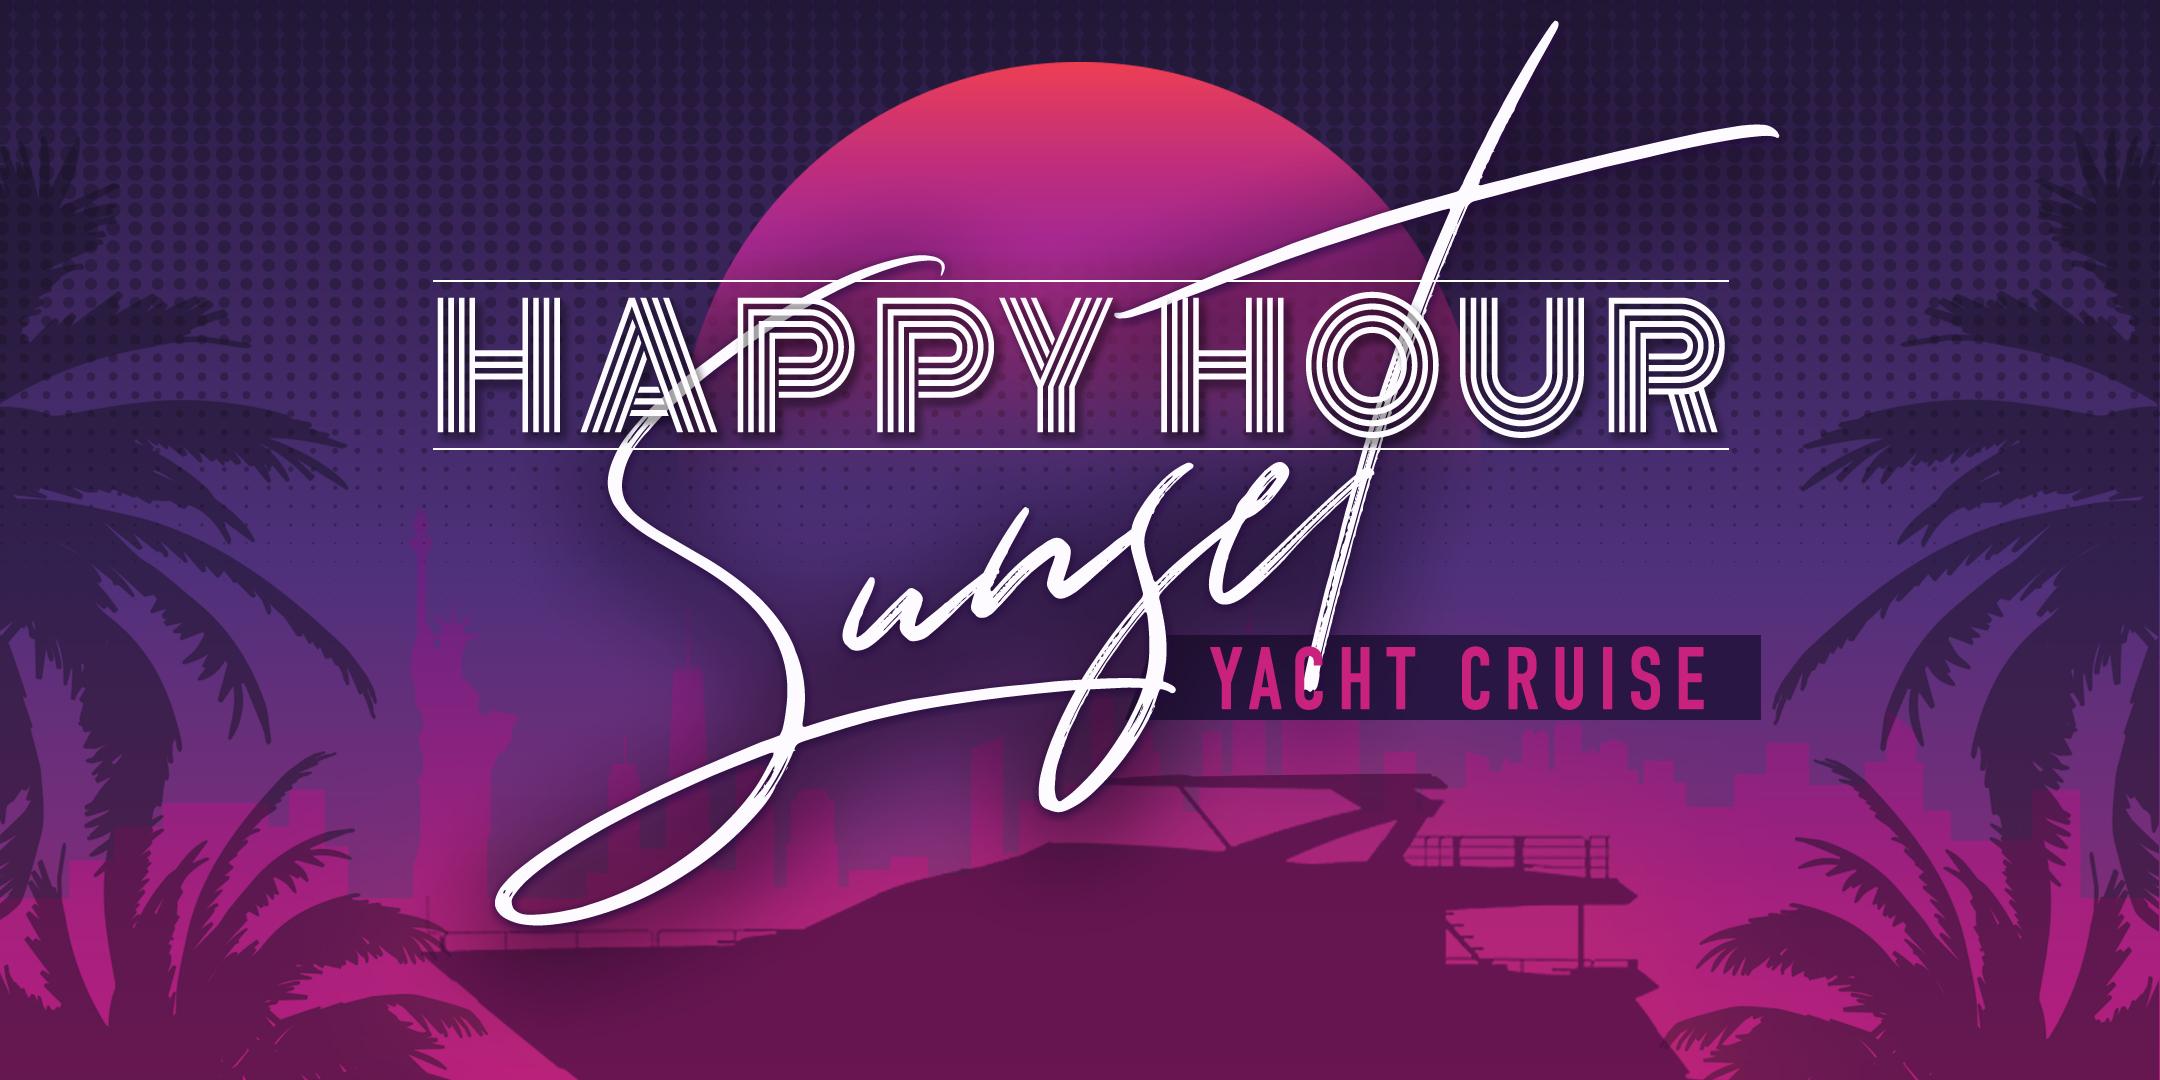 Happy Hour Thursday SUNSET Afterwork Yacht Cruise in Manhattan - Statue of Liberty + NYC Skyline